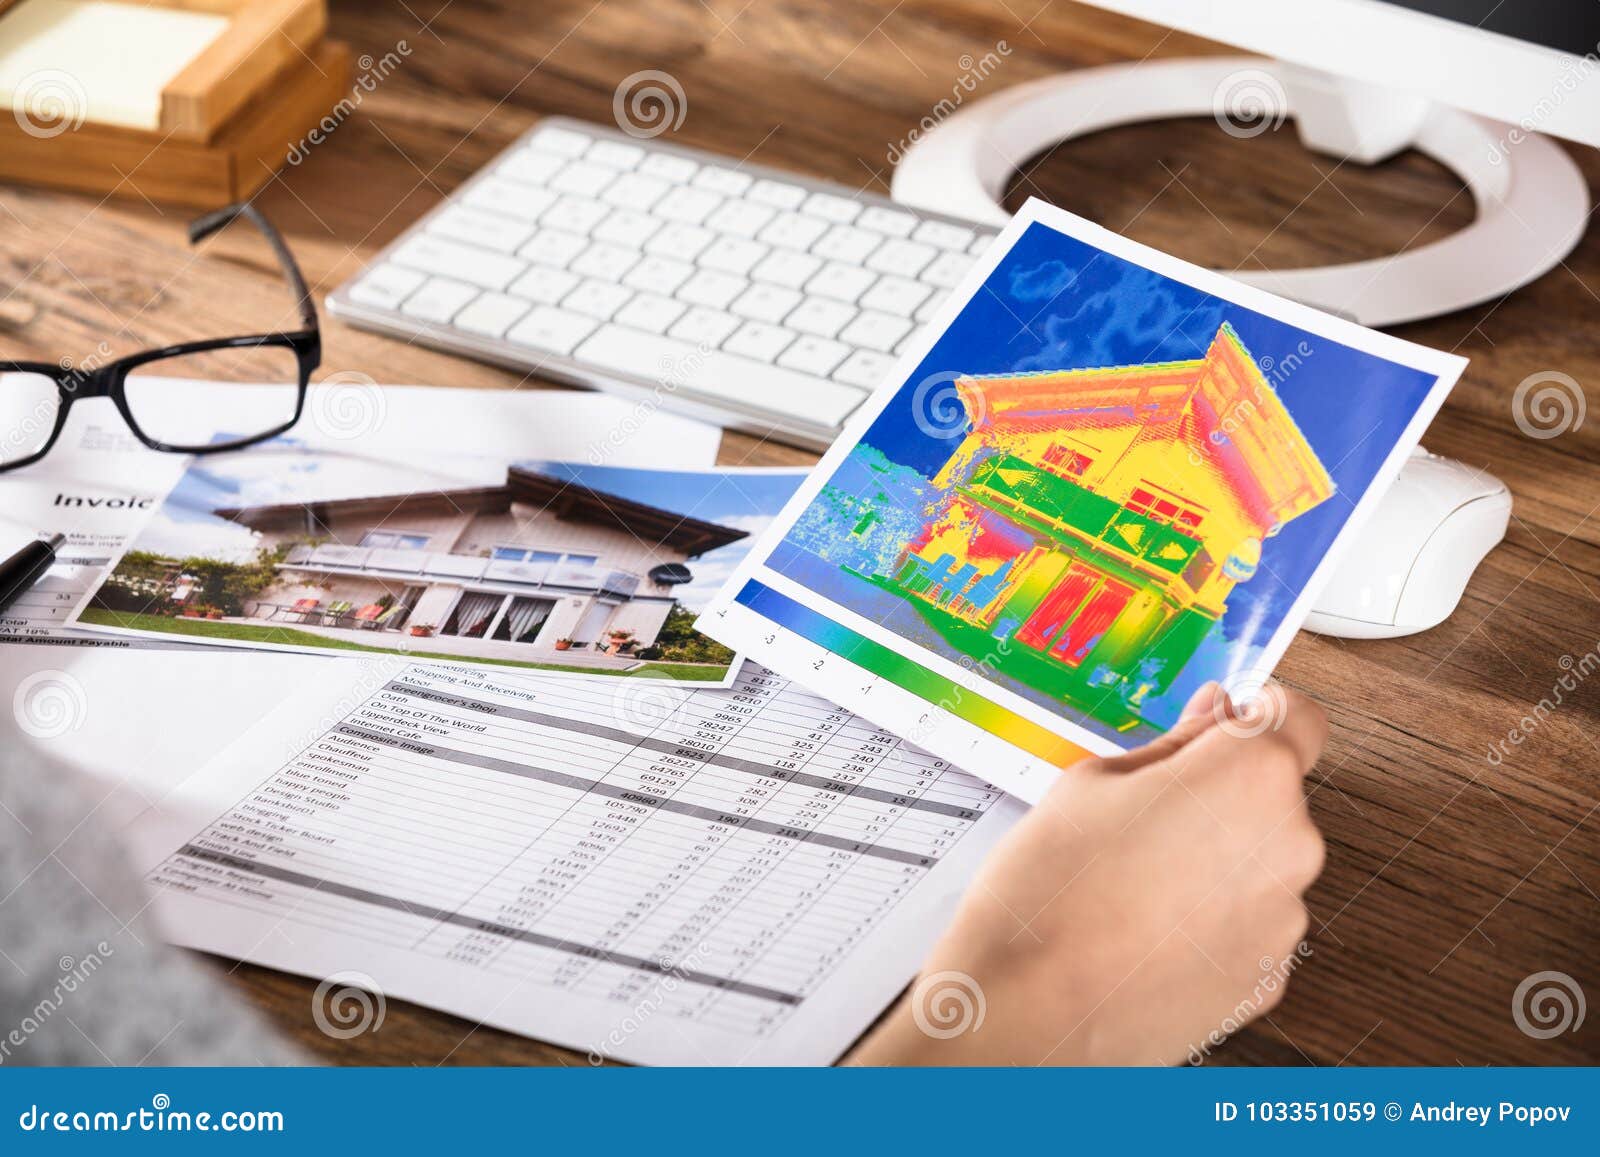 person analyzing the thermal image of a house